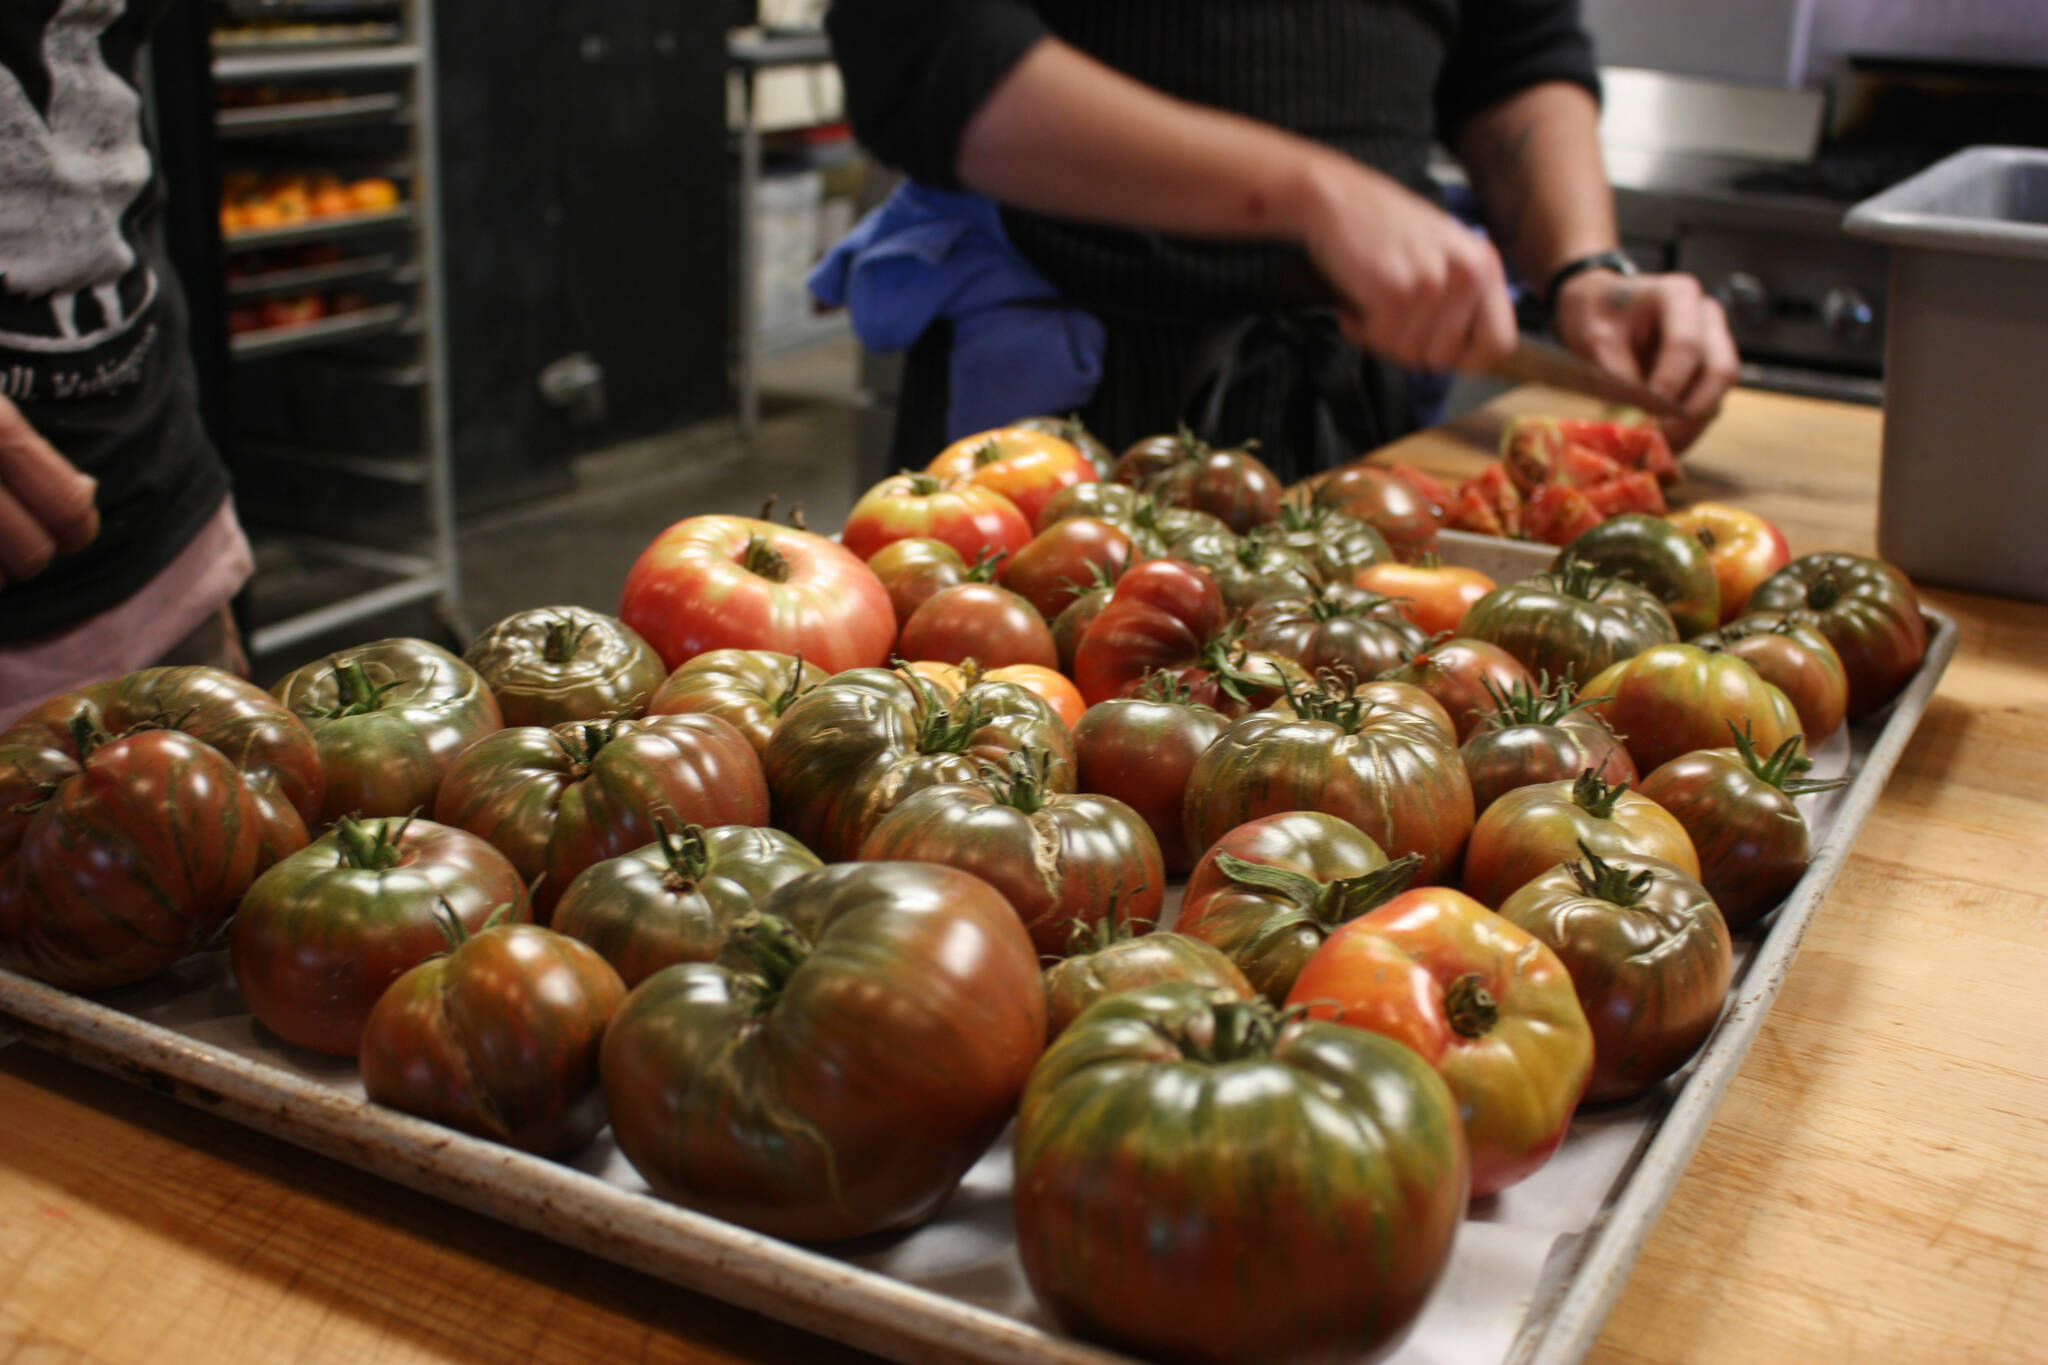 Sarah Cassidy and Chef Kyle Bopes prep heirloom tomatoes from Hearth Farm. Photo by Cameron Sheppard/Sound Publishing